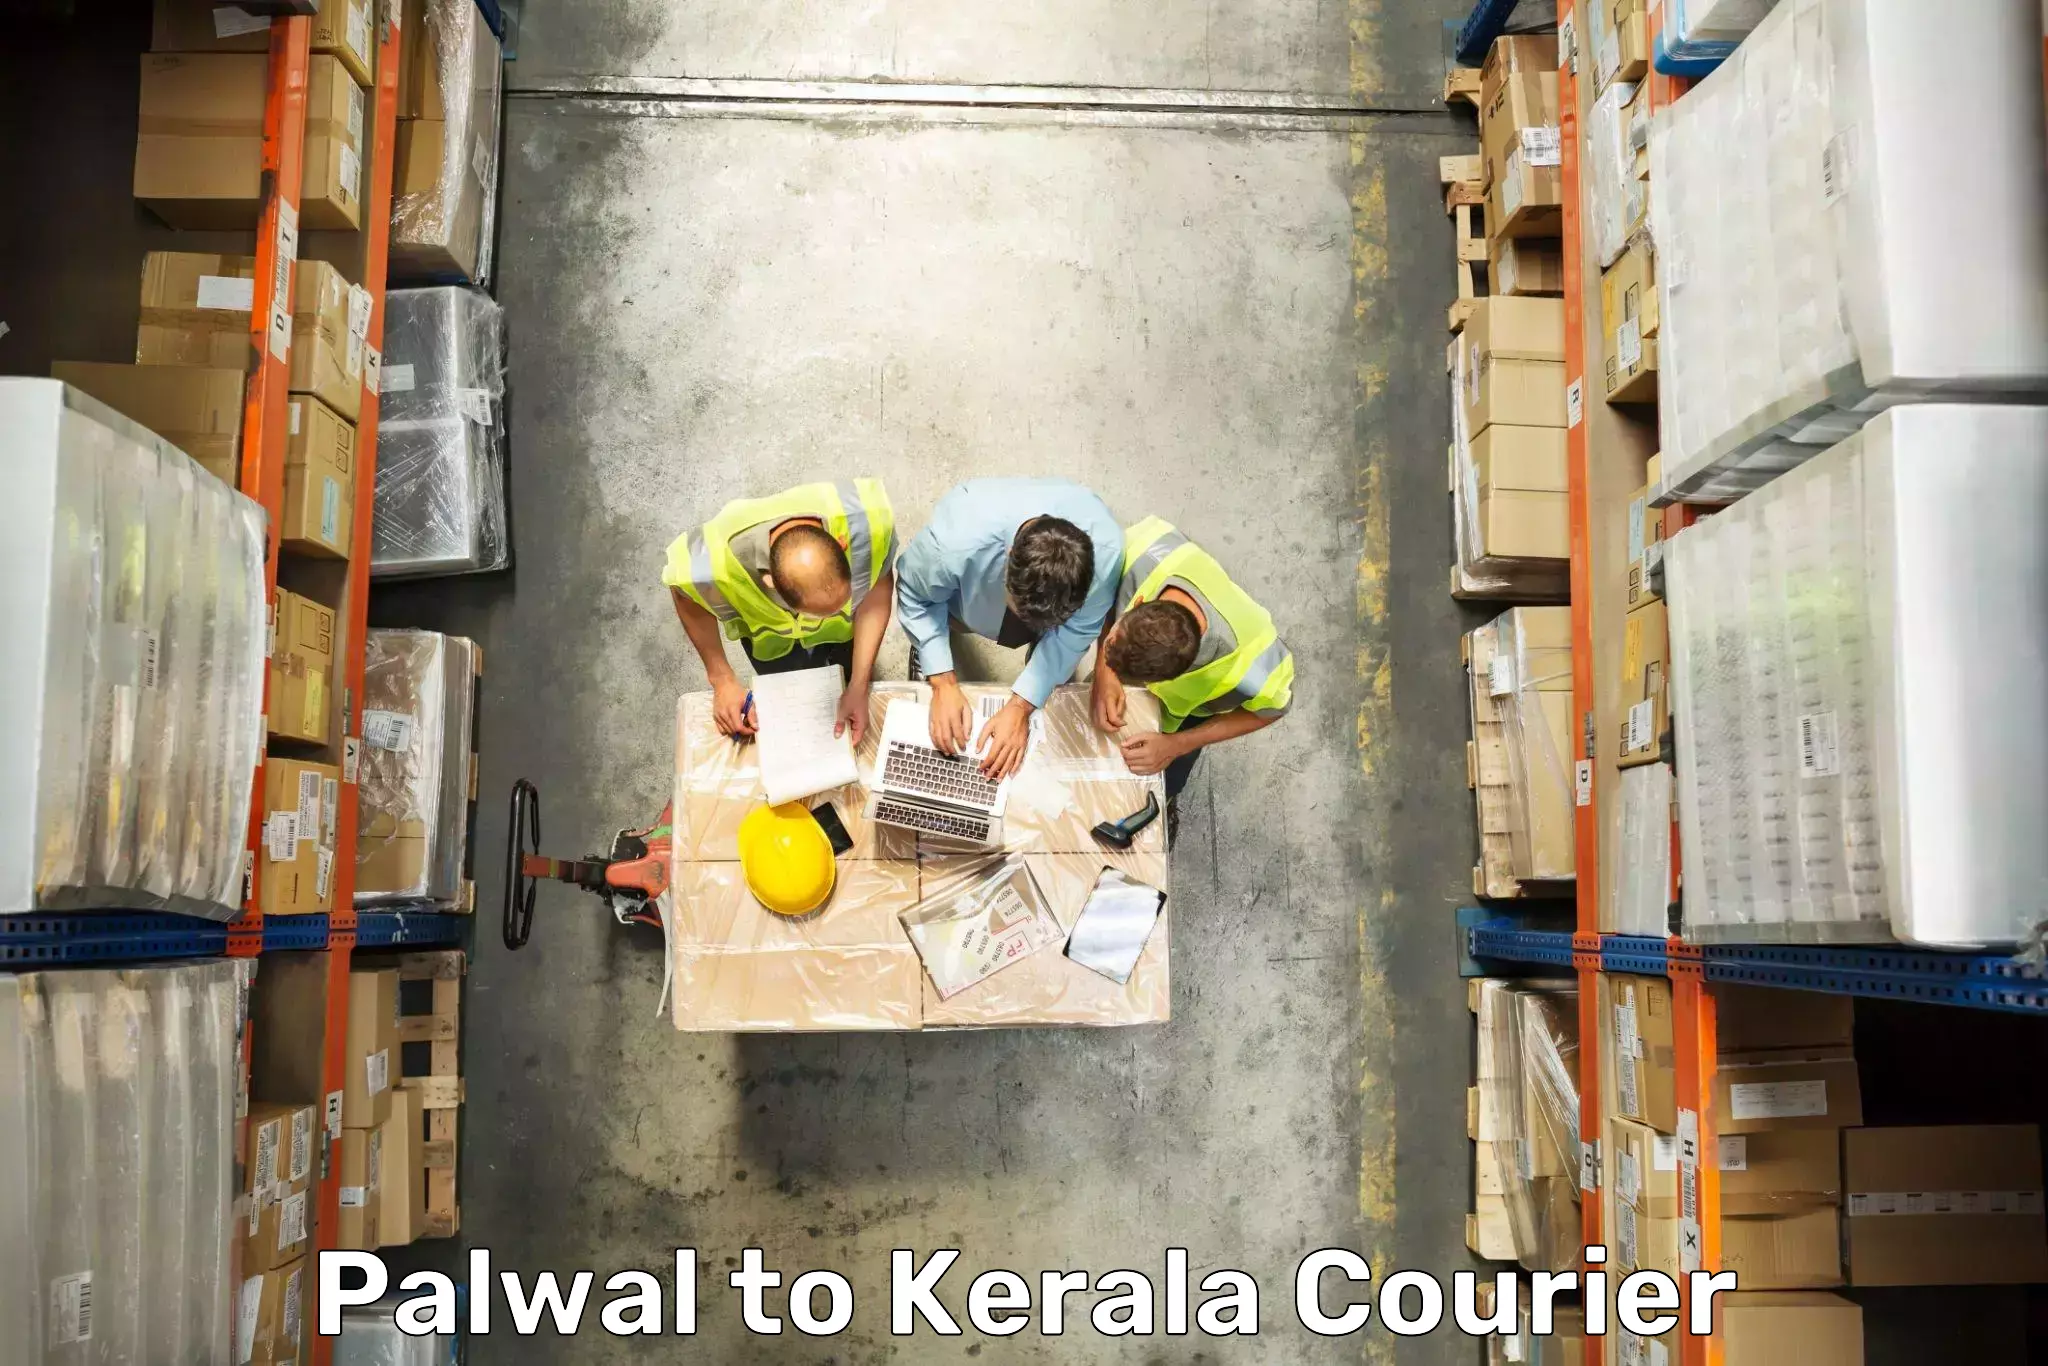 Luggage shipment specialists Palwal to Taliparamba